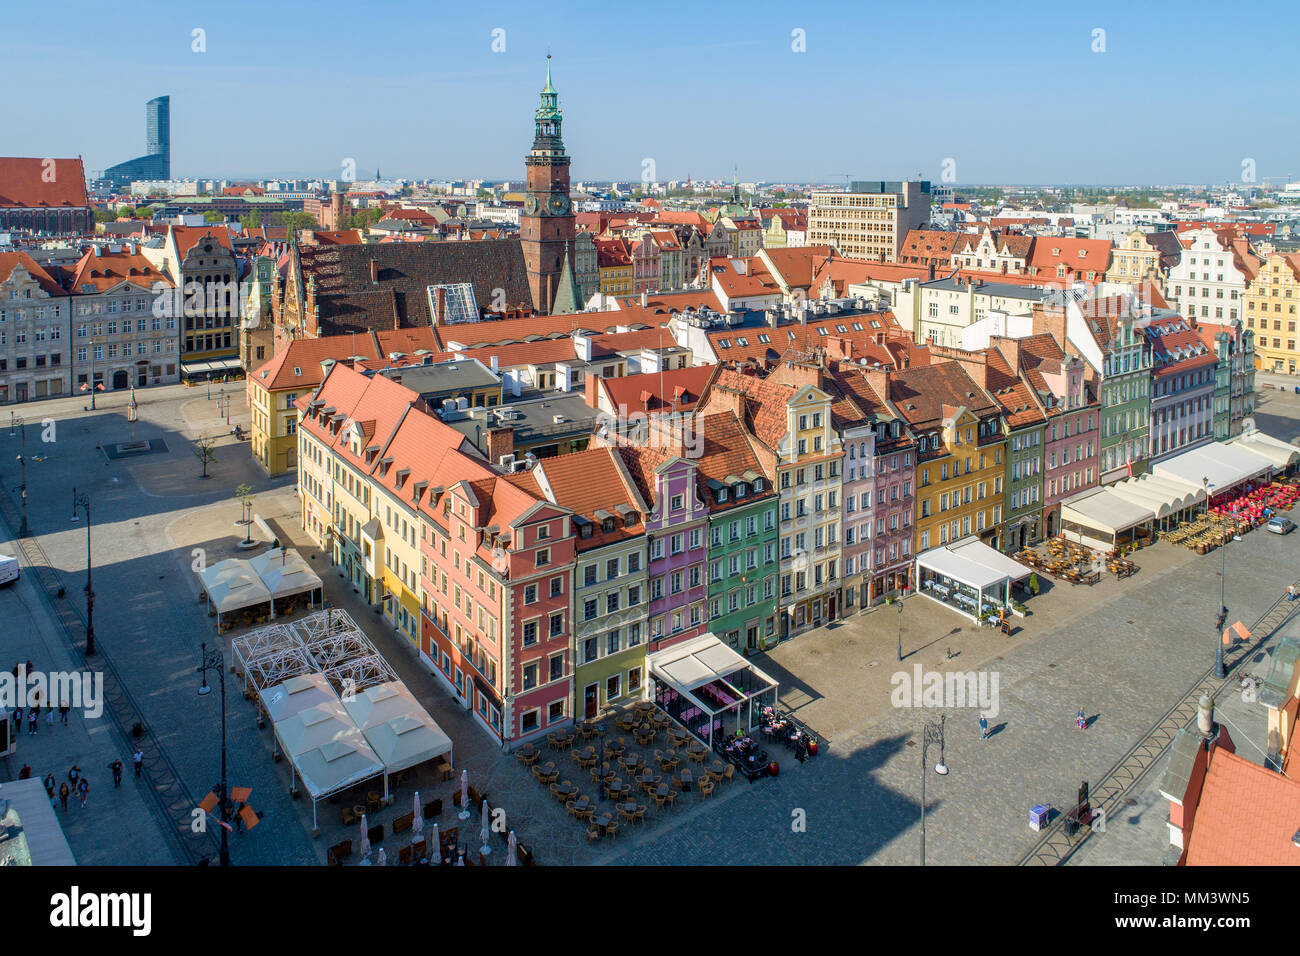 Poland, Wroclaw. Market Square (Rynek) with old historic tenements, gothic city hall and outdoor restaurants. Aerial view. Early morning. Stock Photo